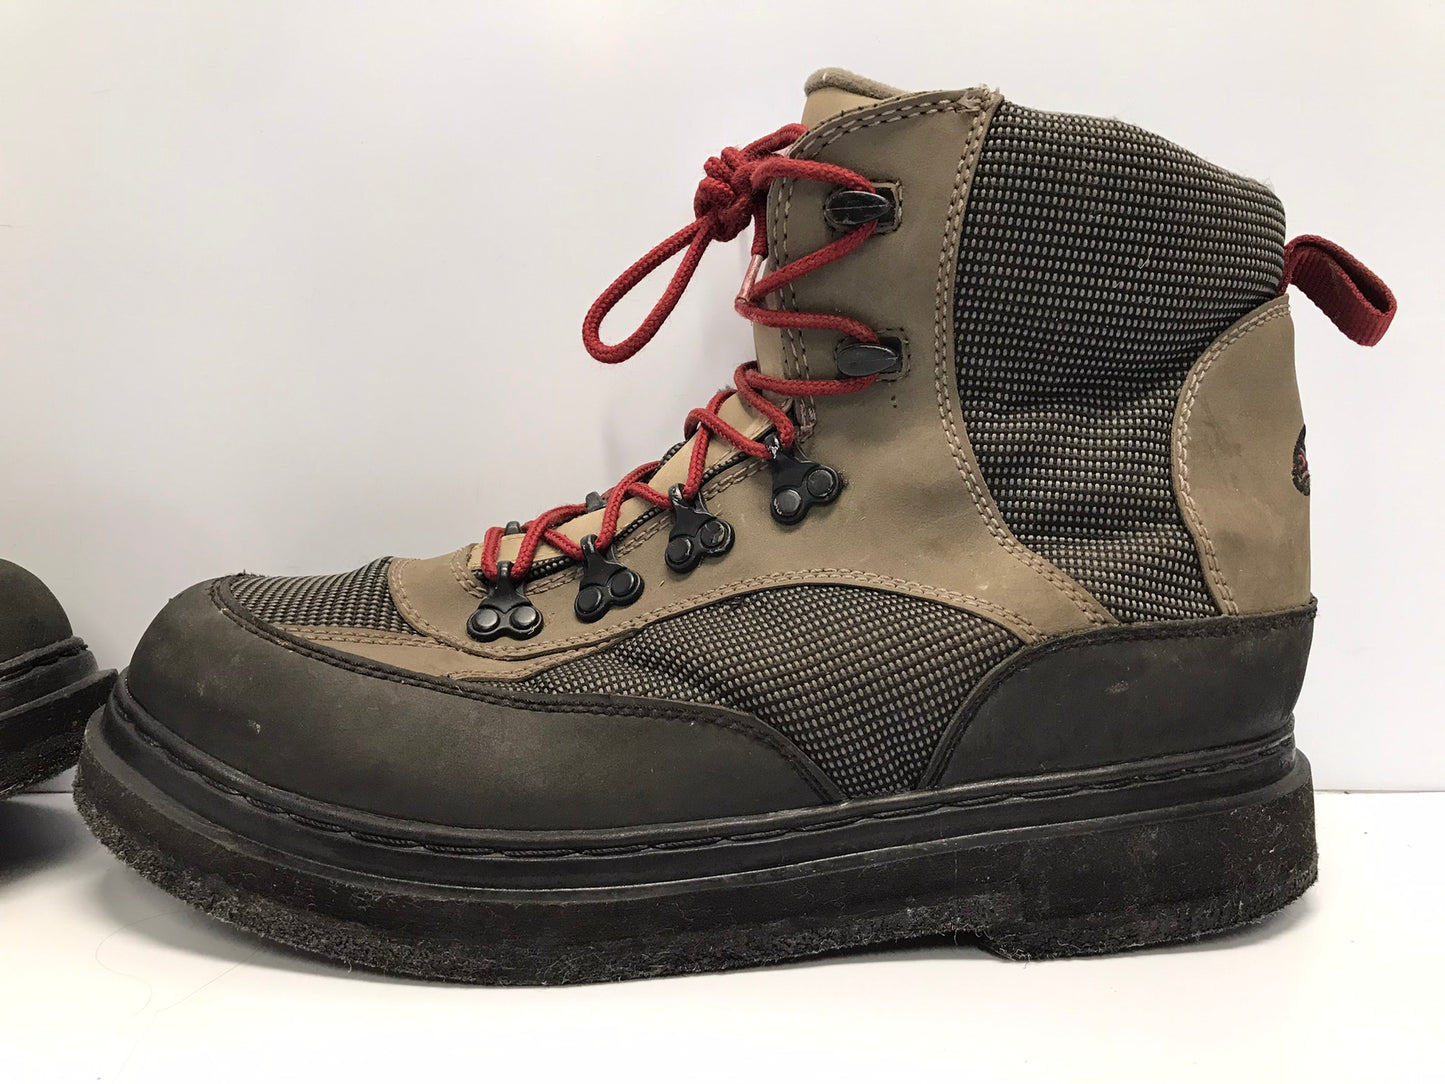 Fly River Fishing Wading Bare Boots Felt Bottom Men's Size 10 Excellent